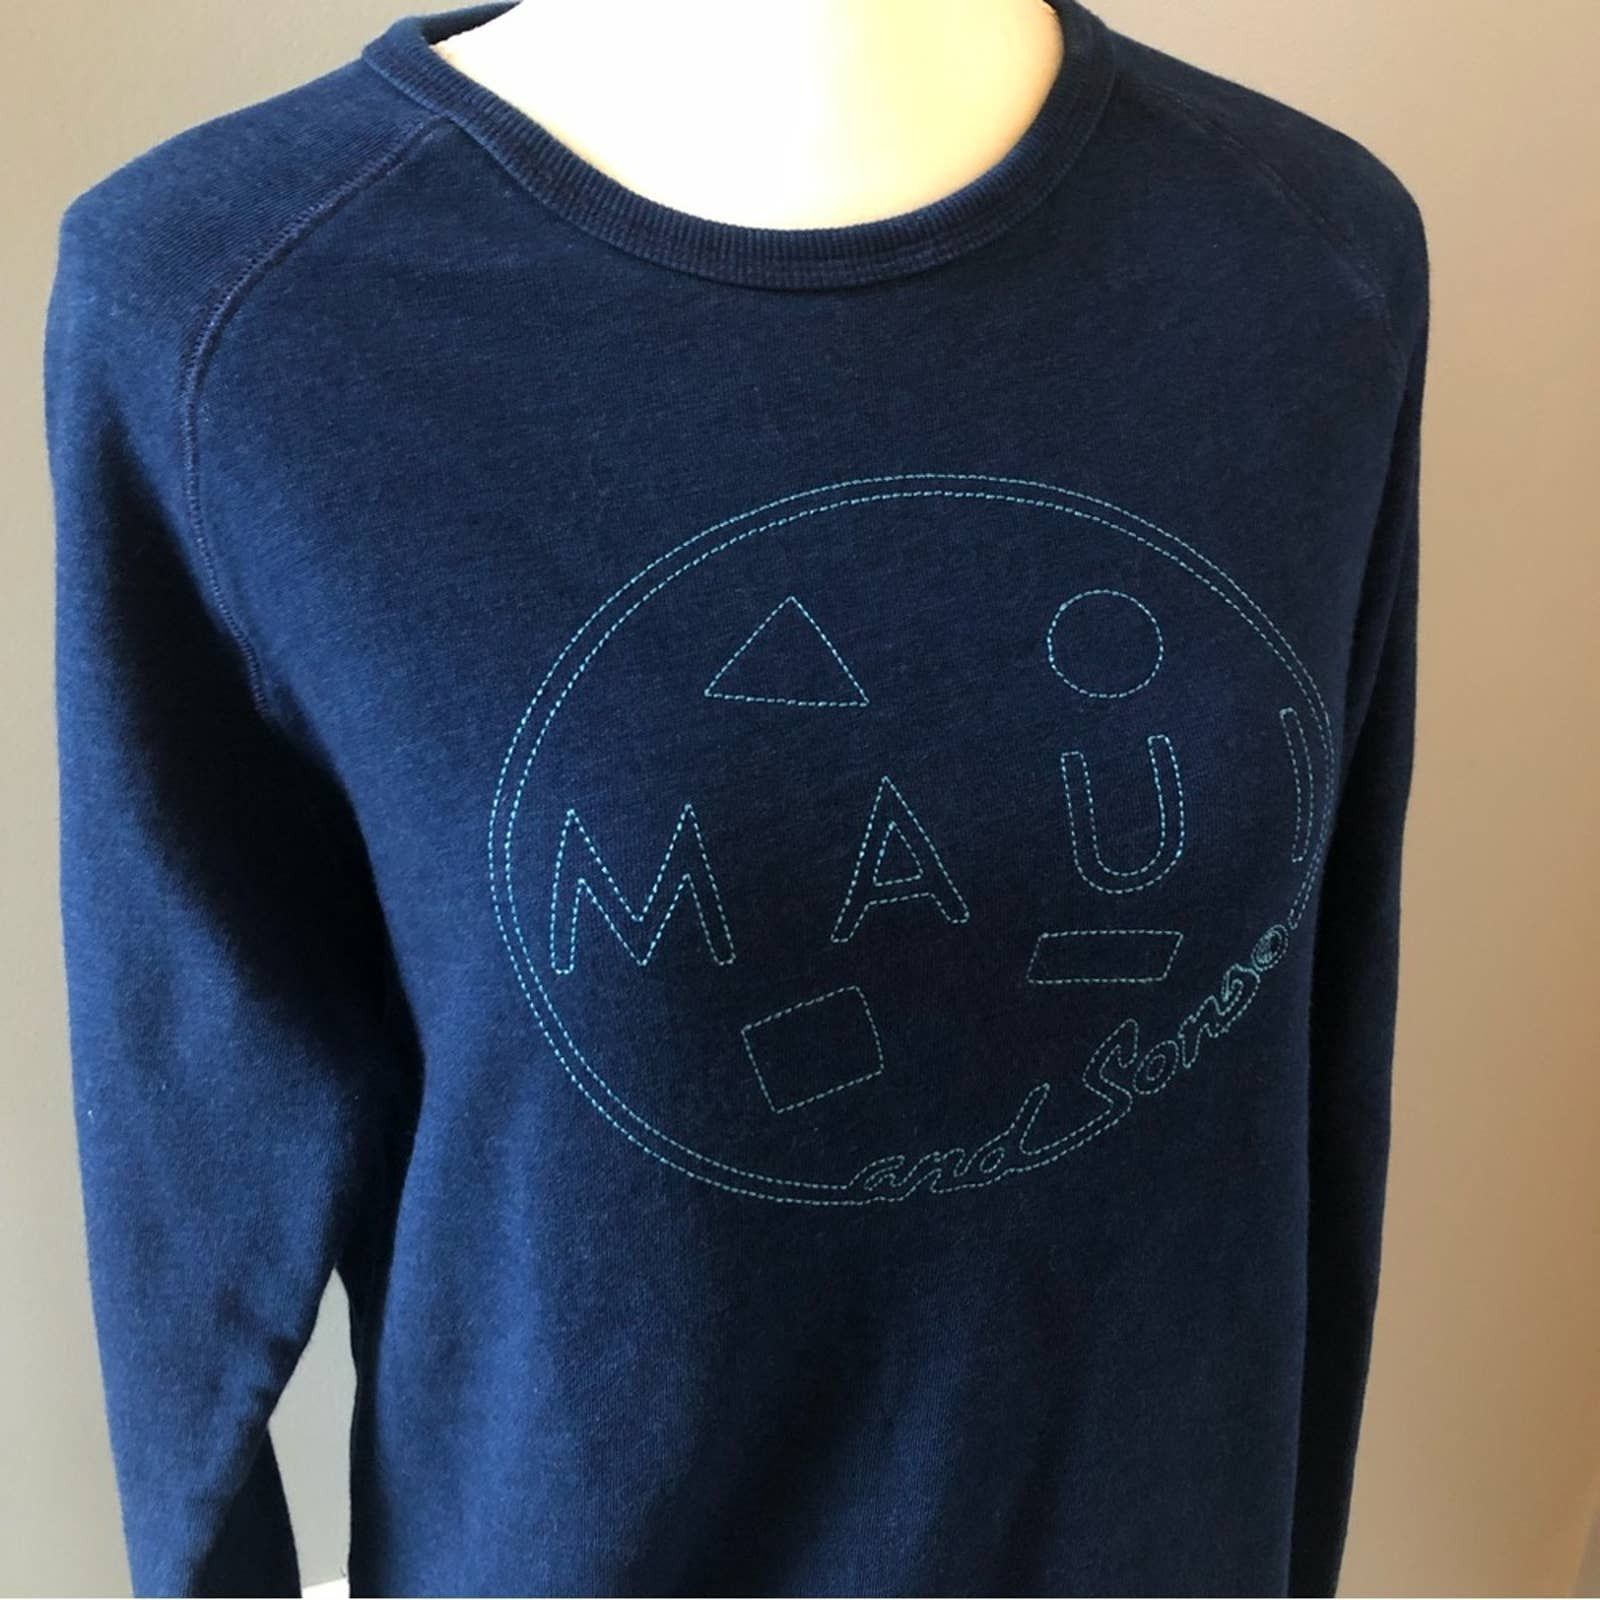 Maui And Sons Maui & Sons Navy Blue Long Sweatshirt Size Medium Size M / US 6-8 / IT 42-44 - 2 Preview